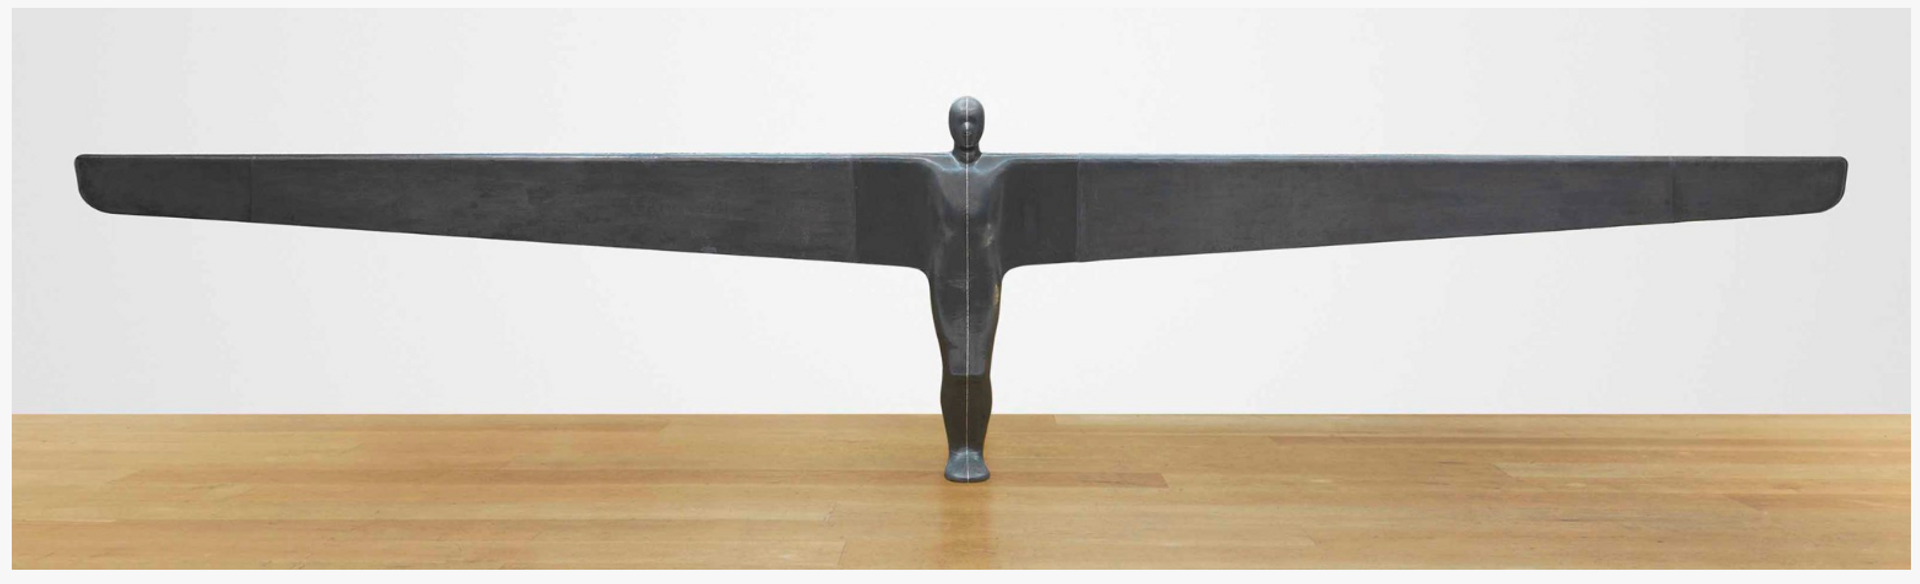 A sculpture castof the human form c ast in lead and steel with an 8.5 metre wing-span resembling an angel in flight.